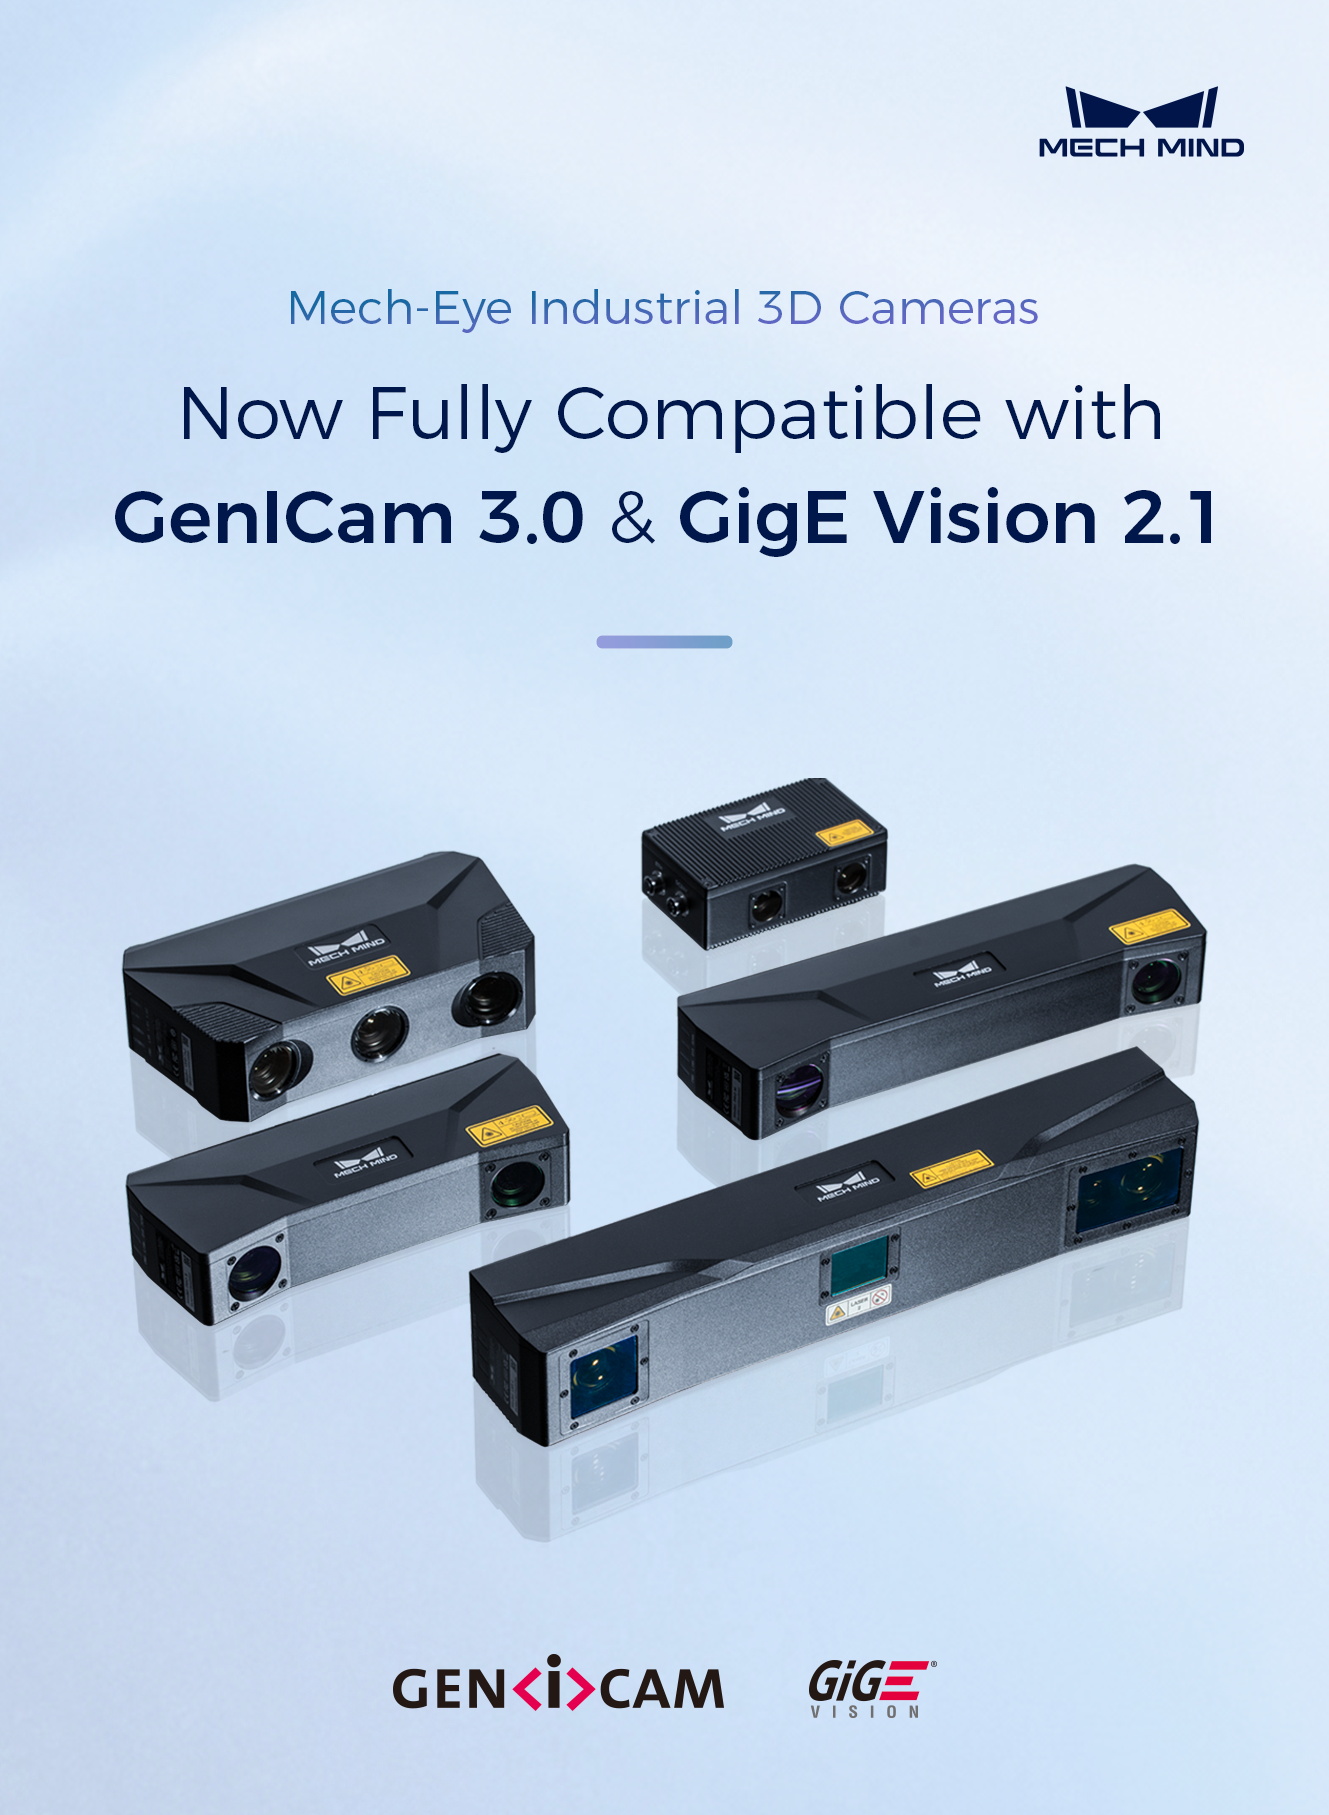 Mech-Eye Industrial 3D Cameras Now Fully Compatible with GenlCam 3.0 & GigE Vision 2.1